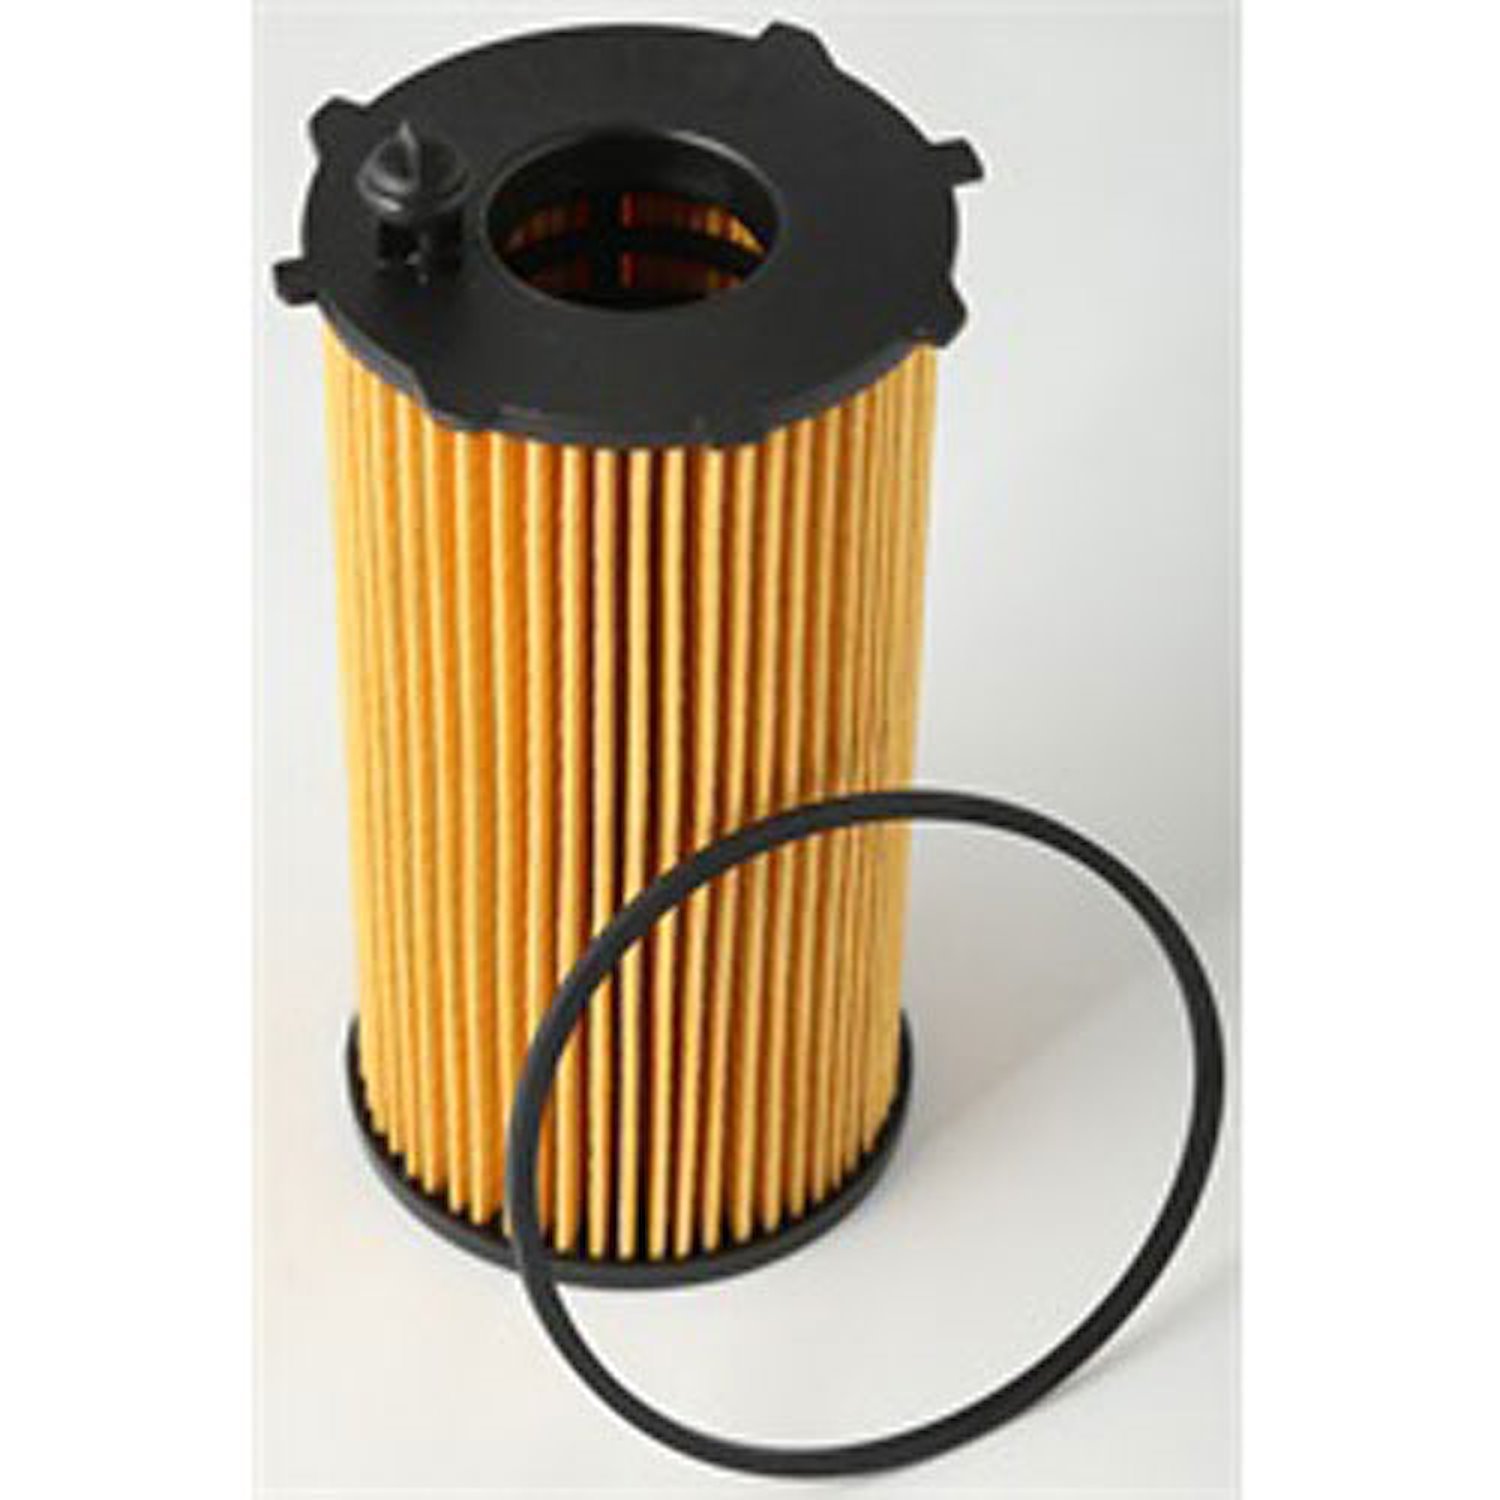 This oil filter element from Omix-ADA fits 08-10 Jeep Libertys and 07-16 Wranglers with the 2.8L diesel engine.